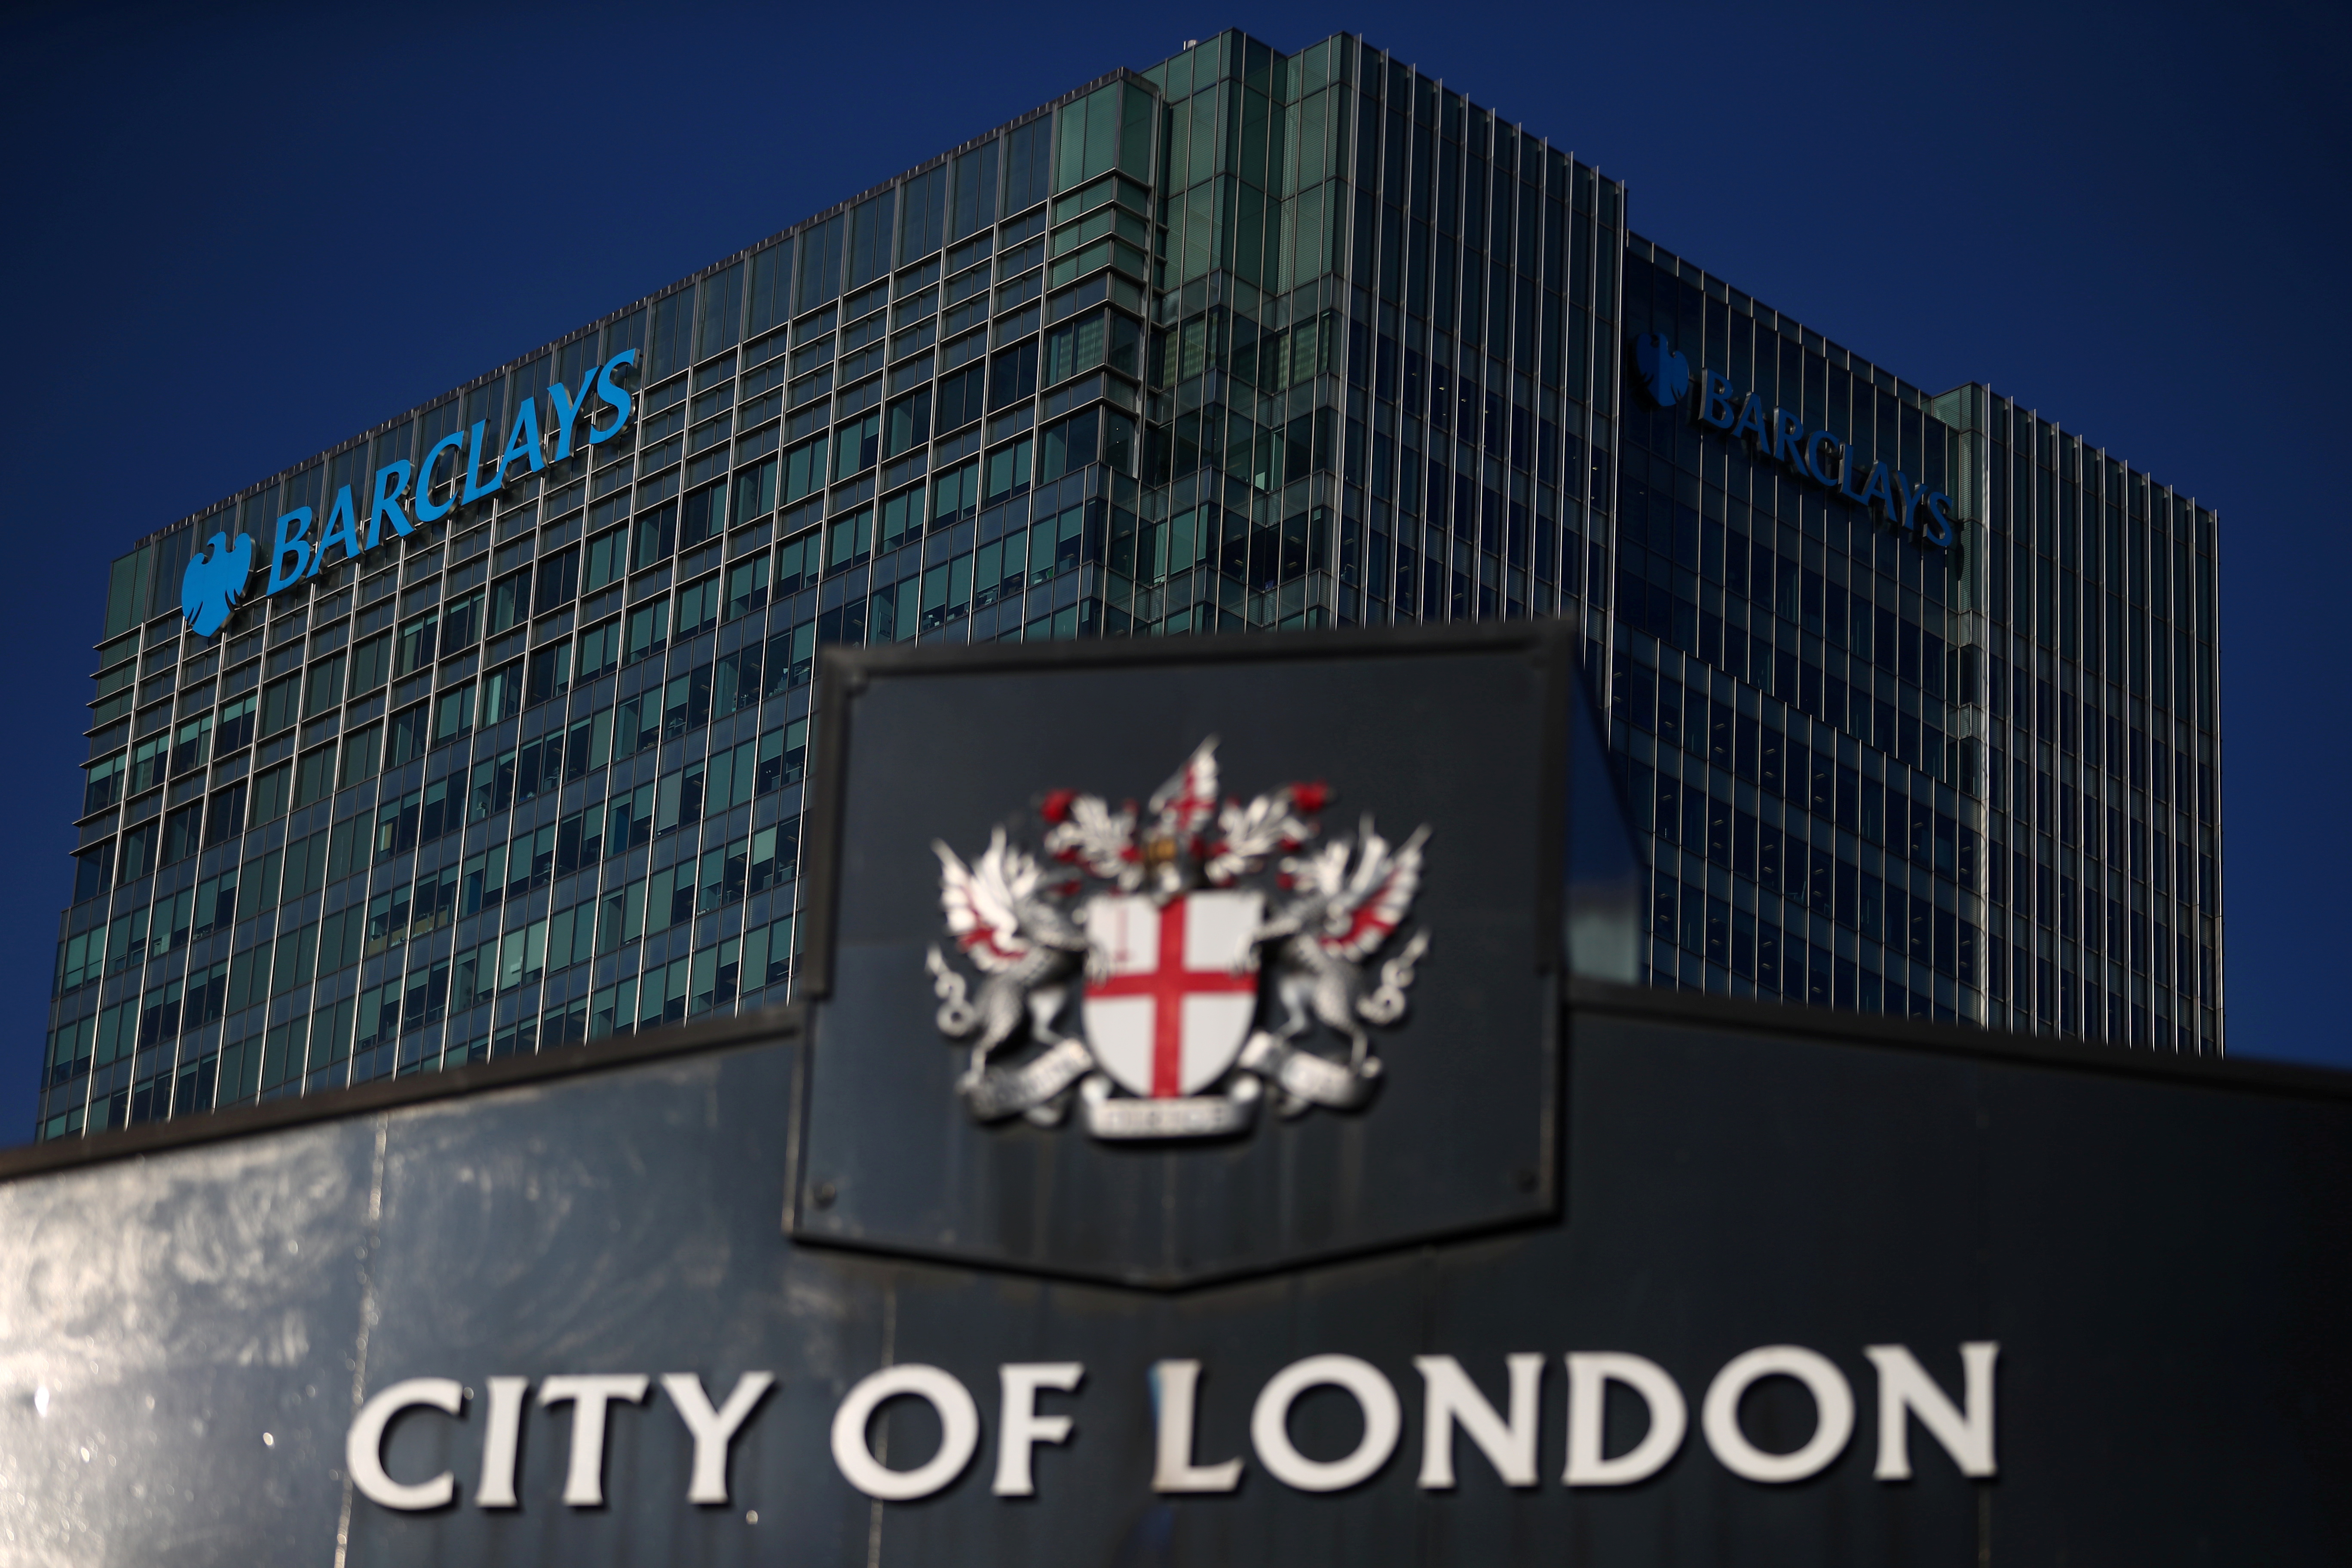 Barclays' building in Canary Wharf is seen behind a City of London sign outside Billingsgate Market in London